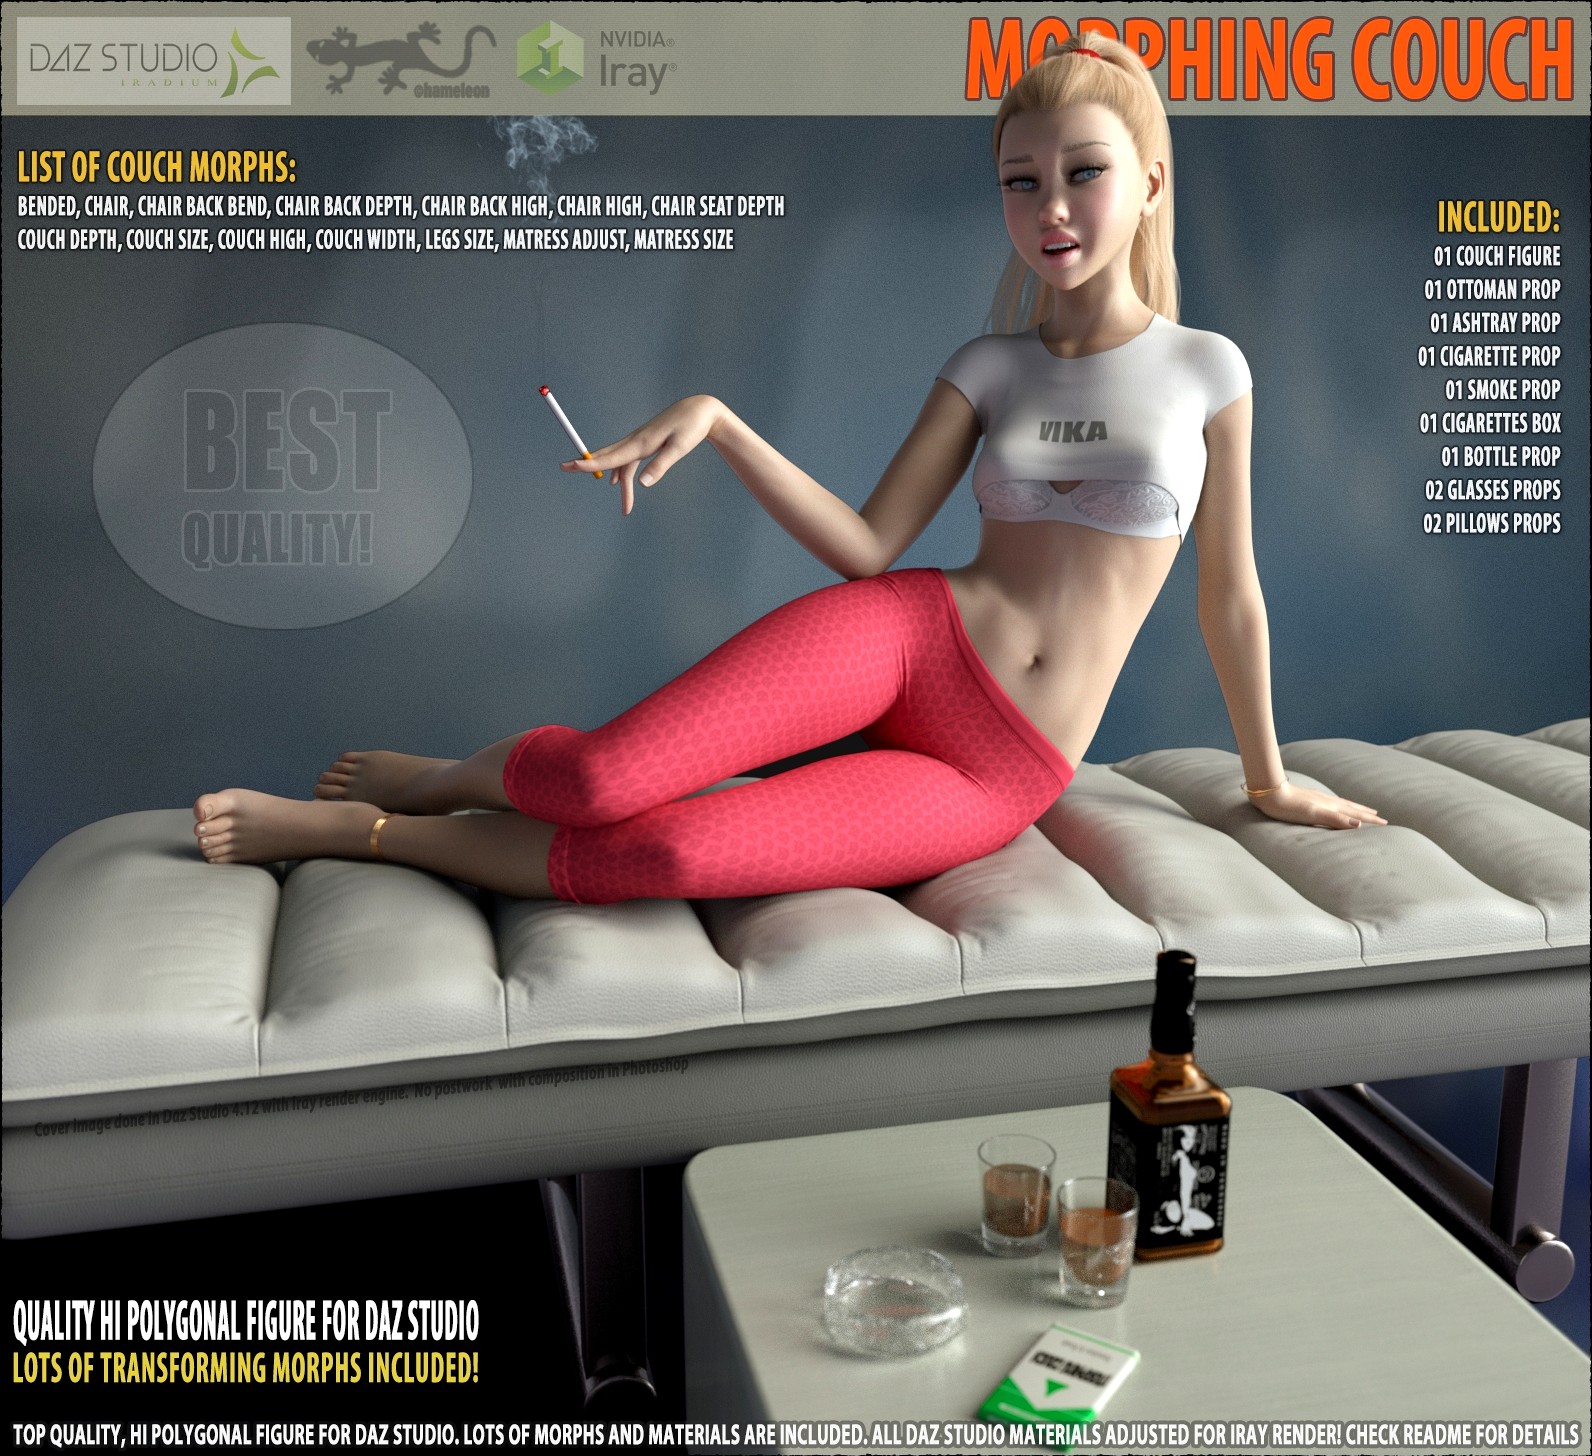 Morphing Couch for Daz Studio